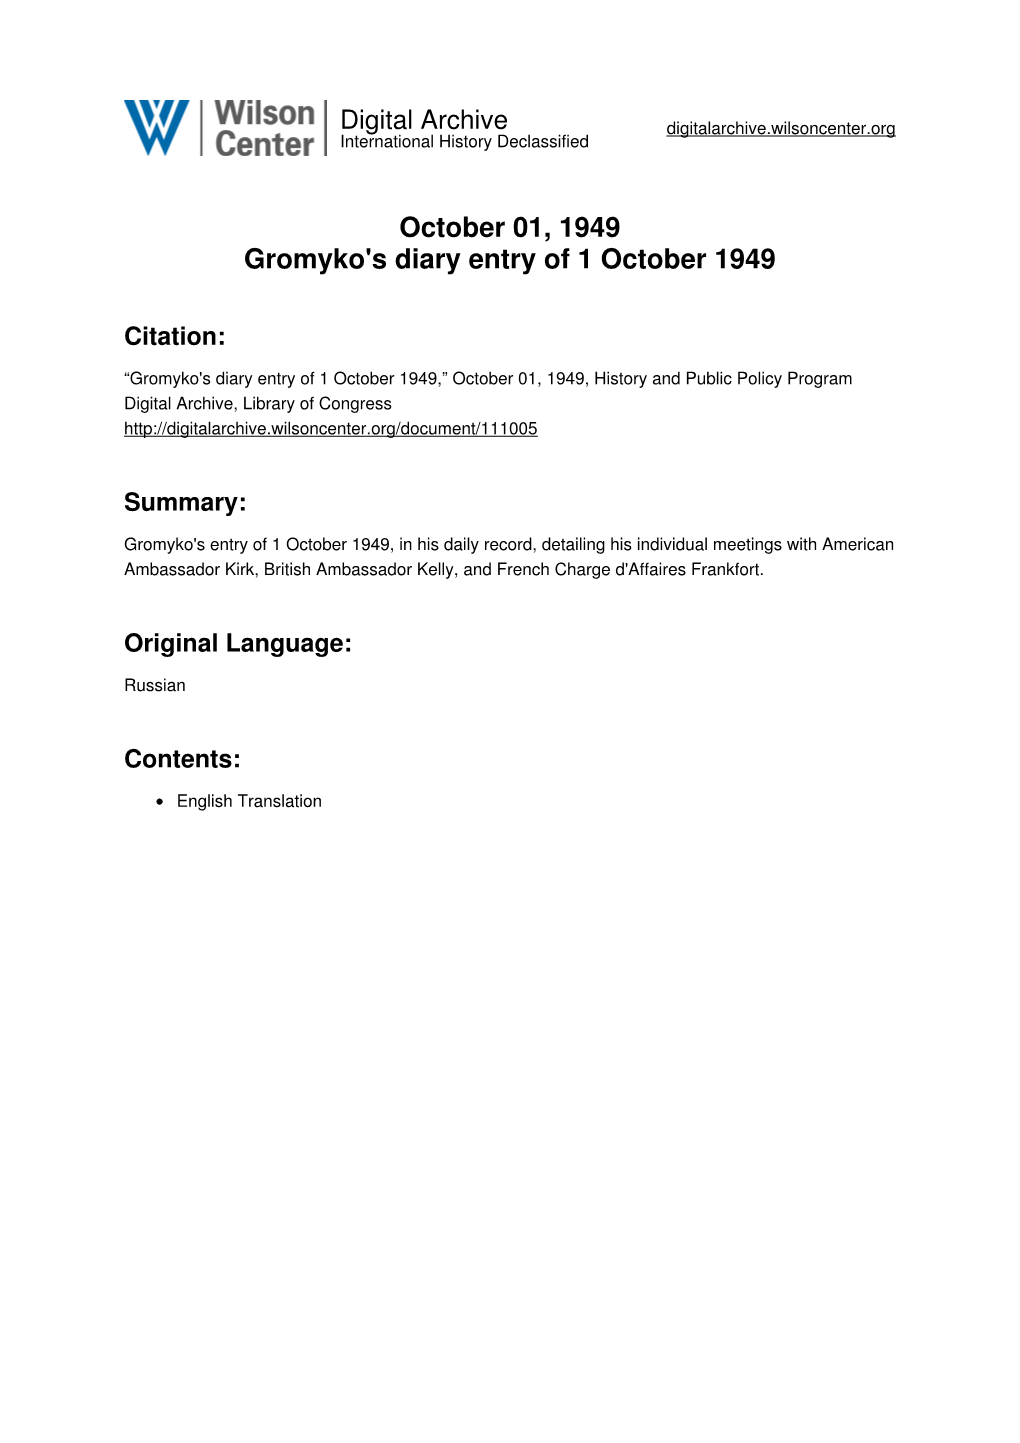 October 01, 1949 Gromyko's Diary Entry of 1 October 1949